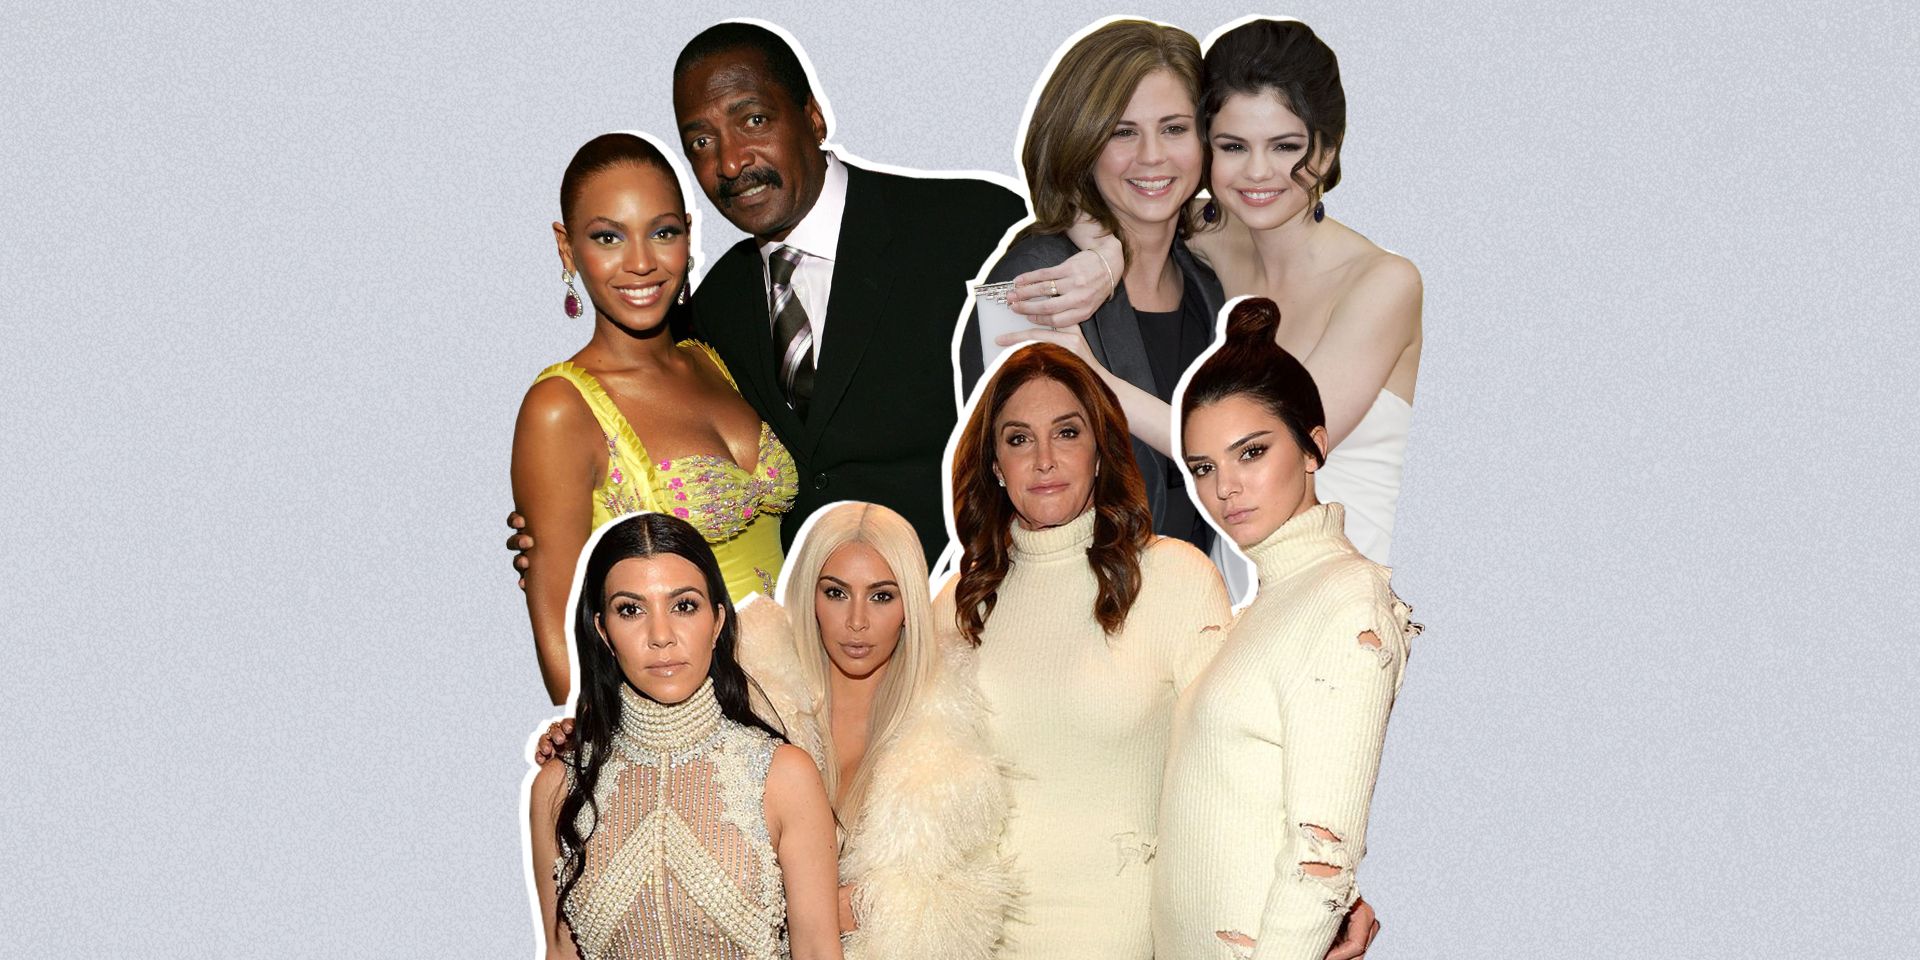 15 Celebrity-Parent Feuds - Celebs Who Are Estranged From Parents